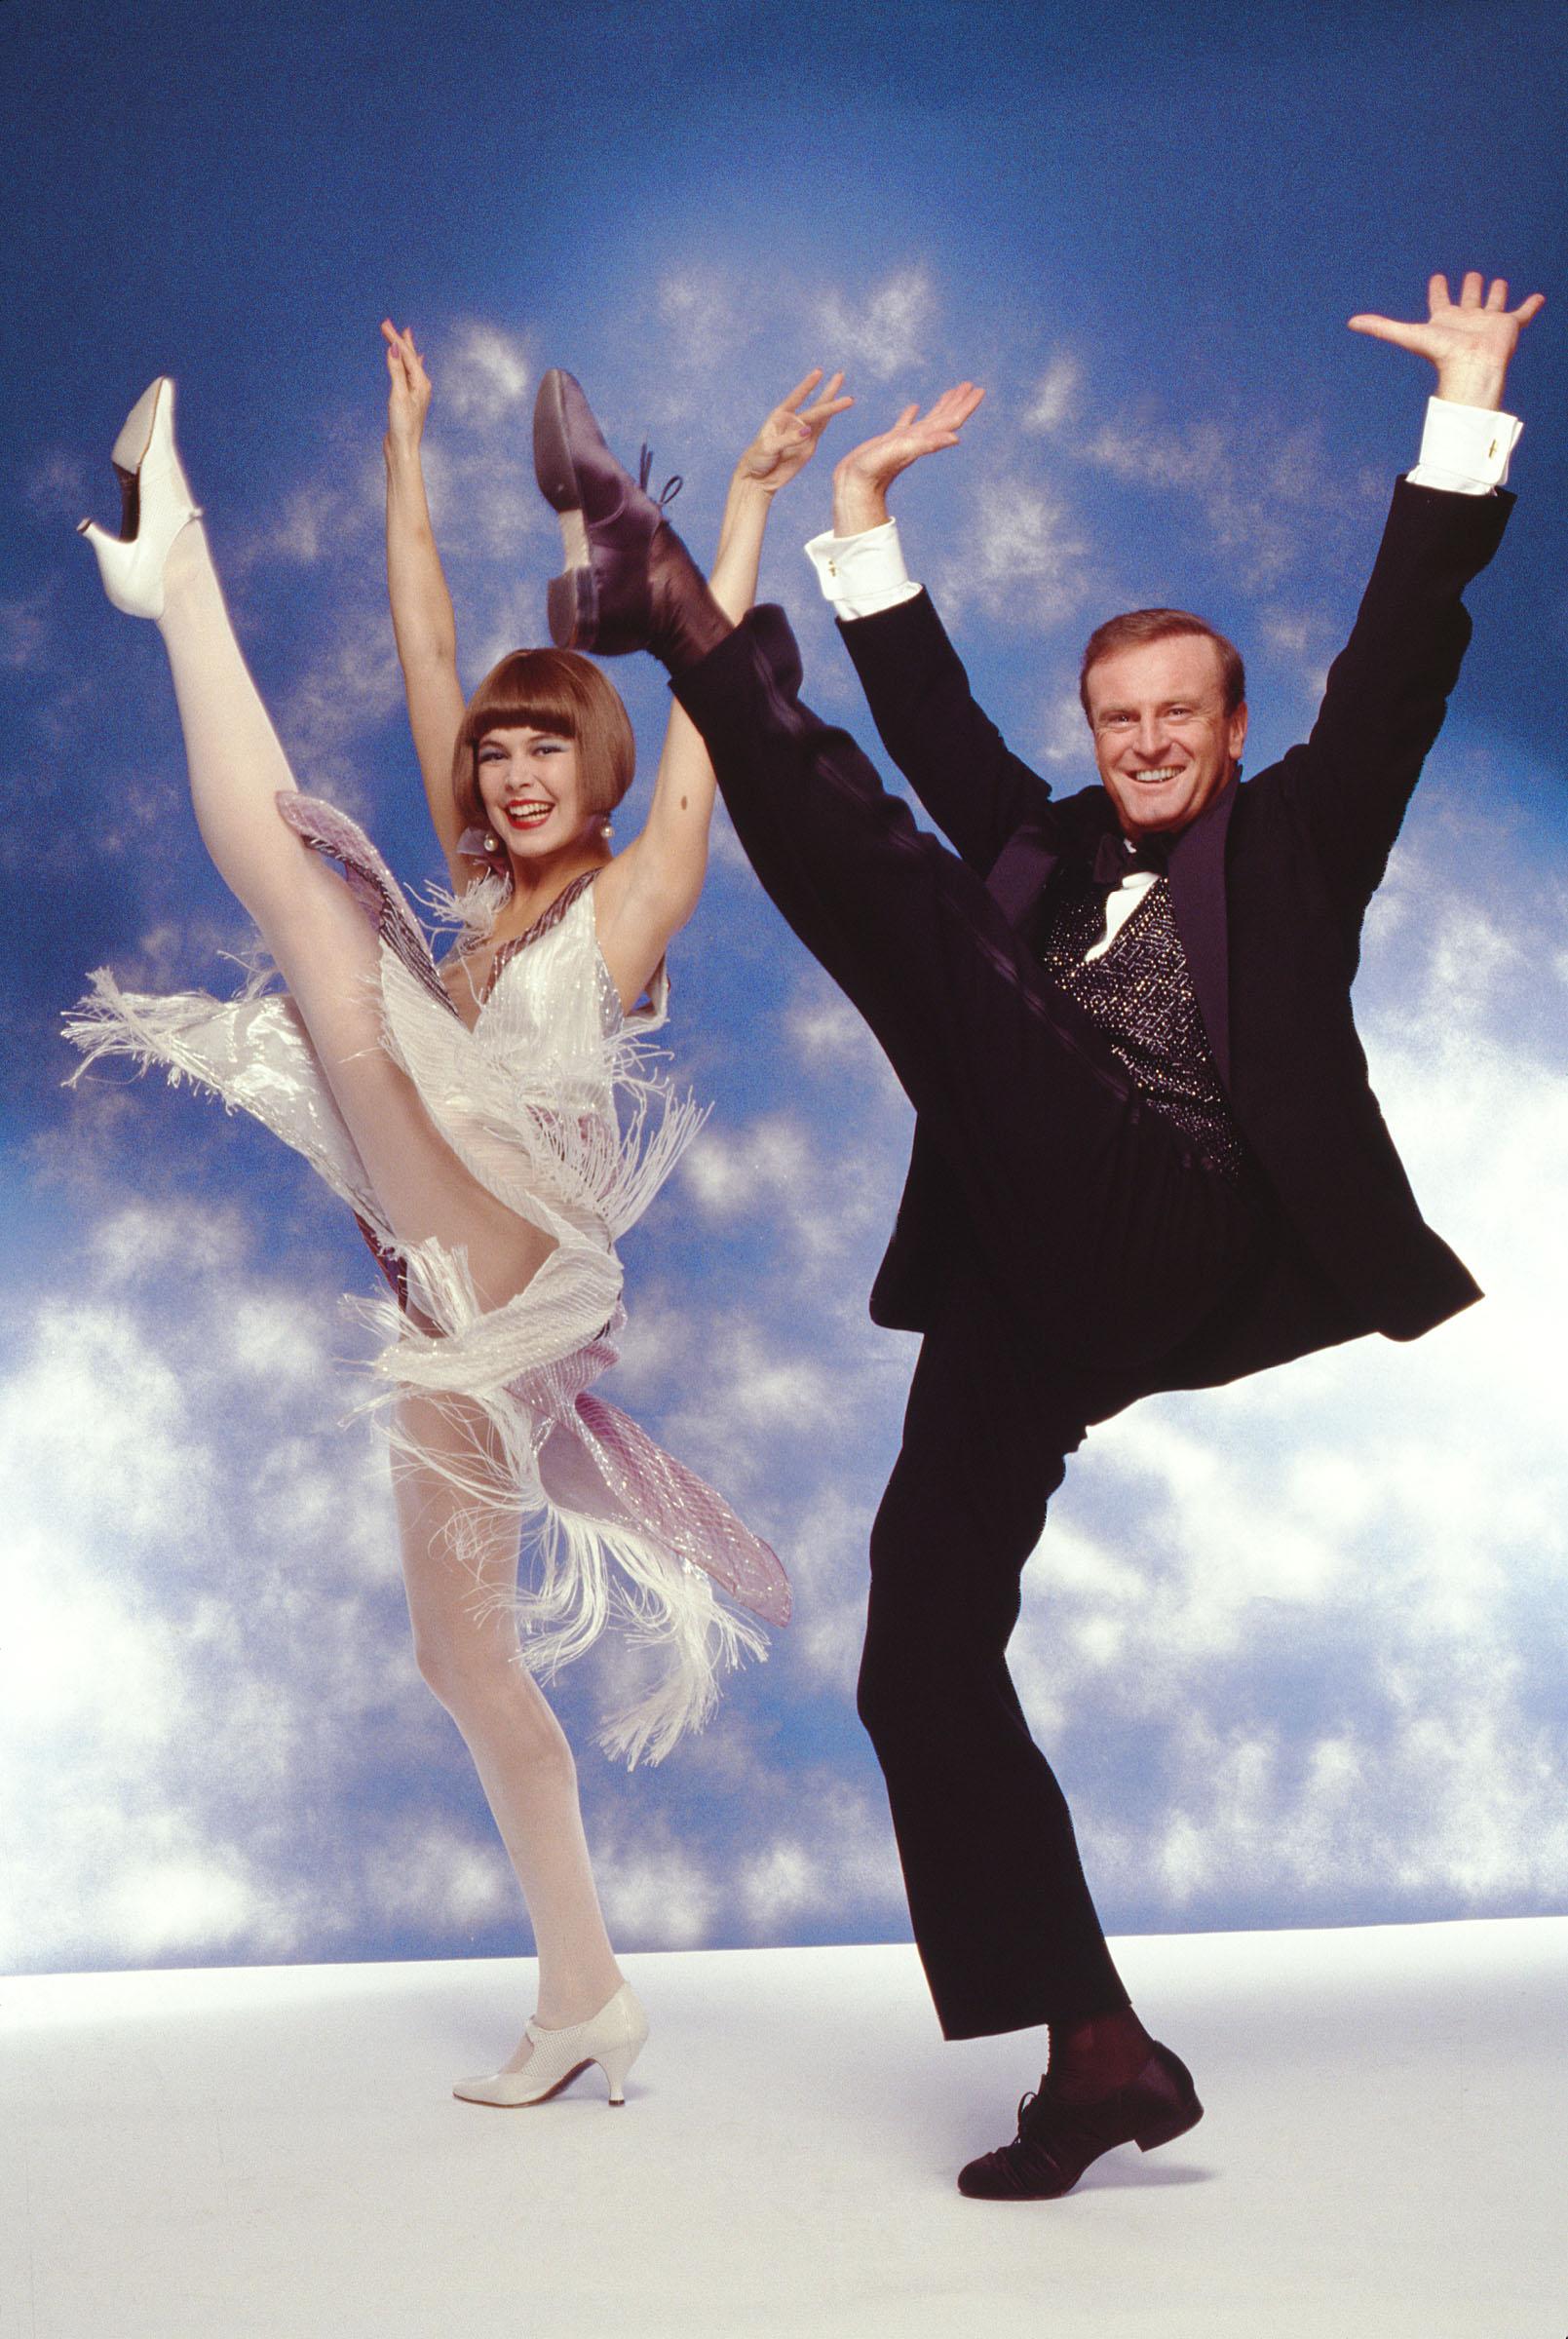 Jack Mitchell Color Photograph - Colleen Dunn & Peter Allen on Broadway 'Dance Magazine' cover shot 17 x 22"  